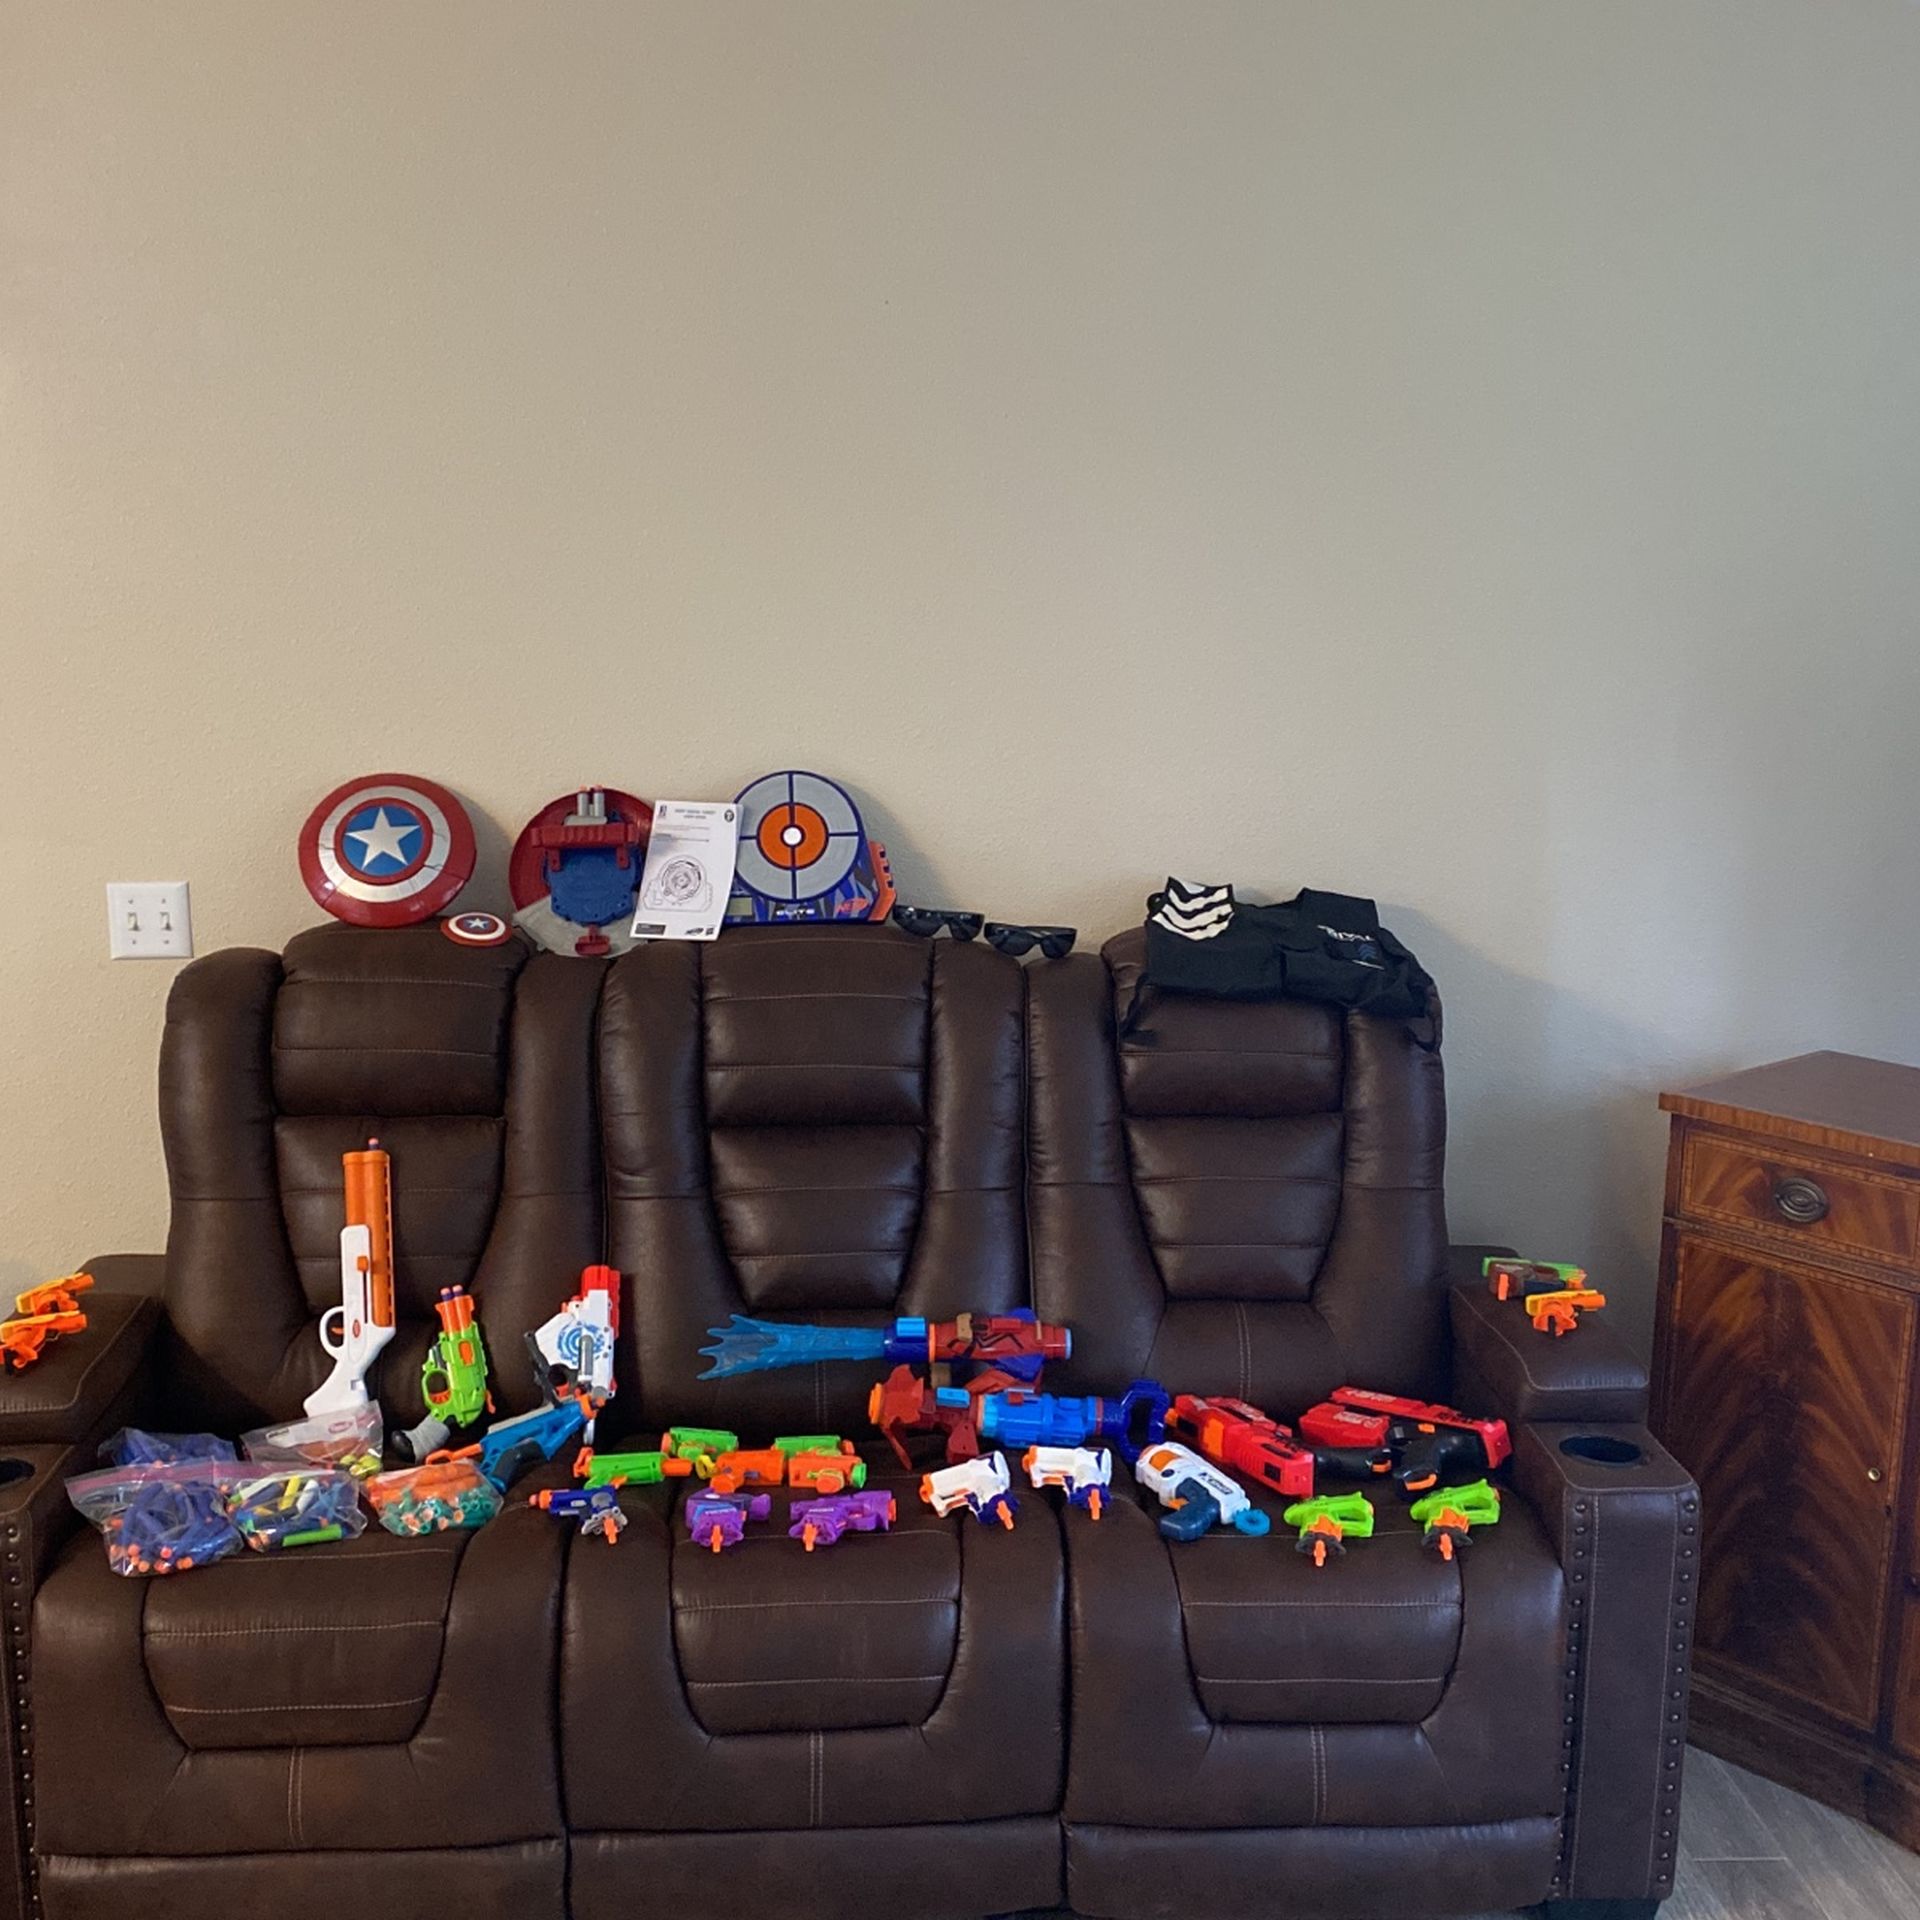 All Nerf Stuff - Vest ,Safety Glasses ,Darts And A Nerf Target And Comes With25 Nerf Guns 